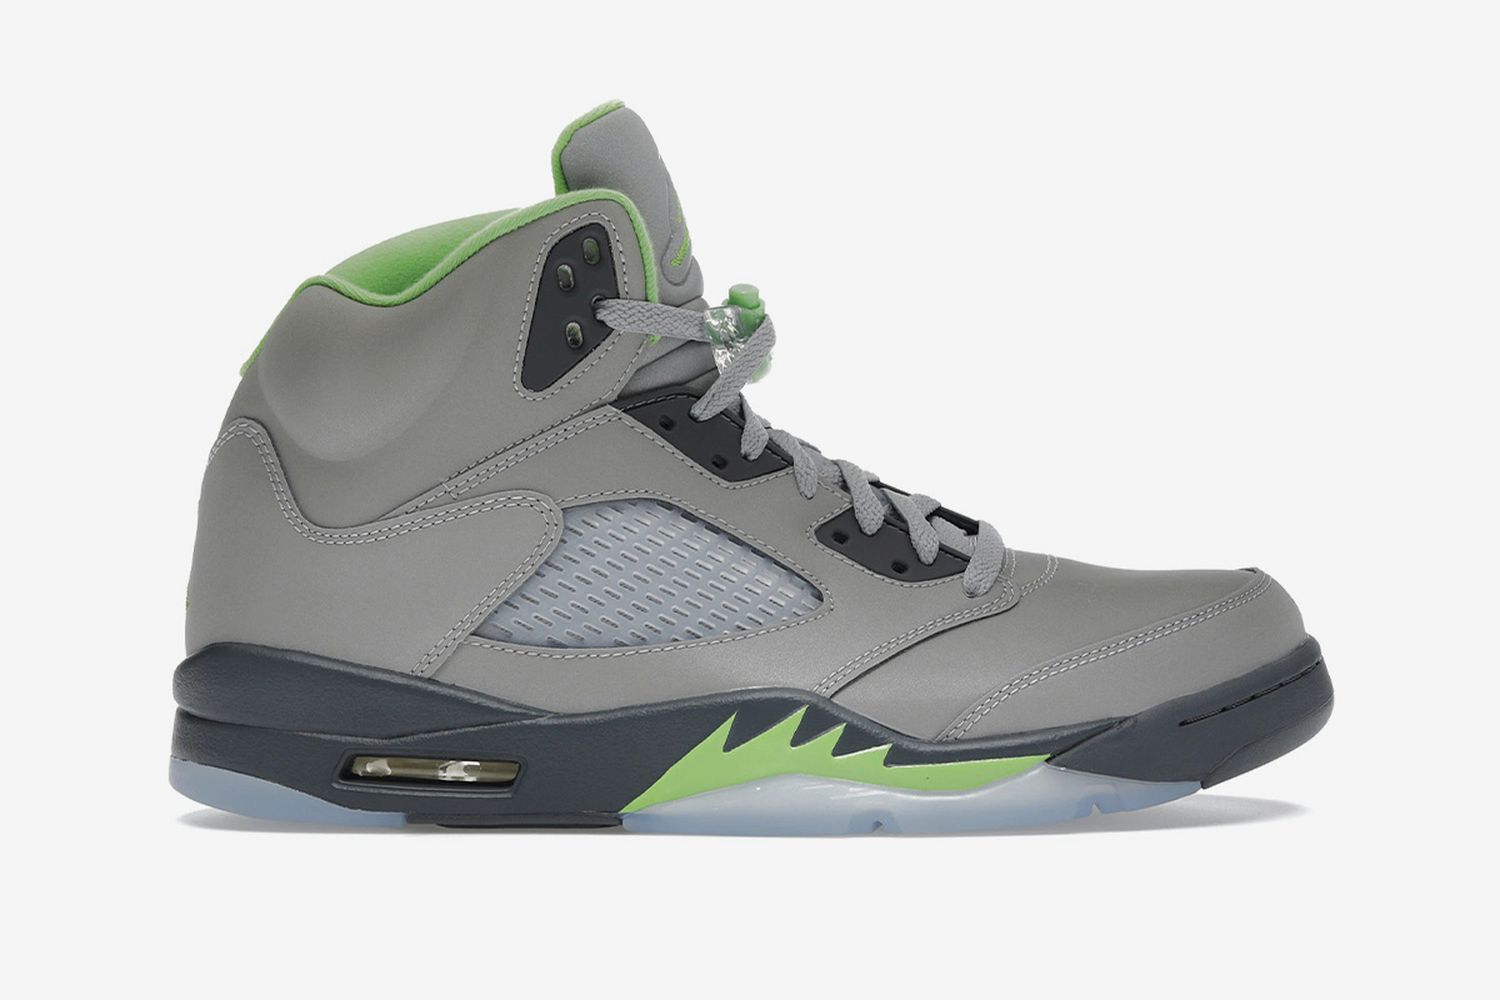 Shop the Best Nike Jordan 5 Sneakers to Shop Right Now